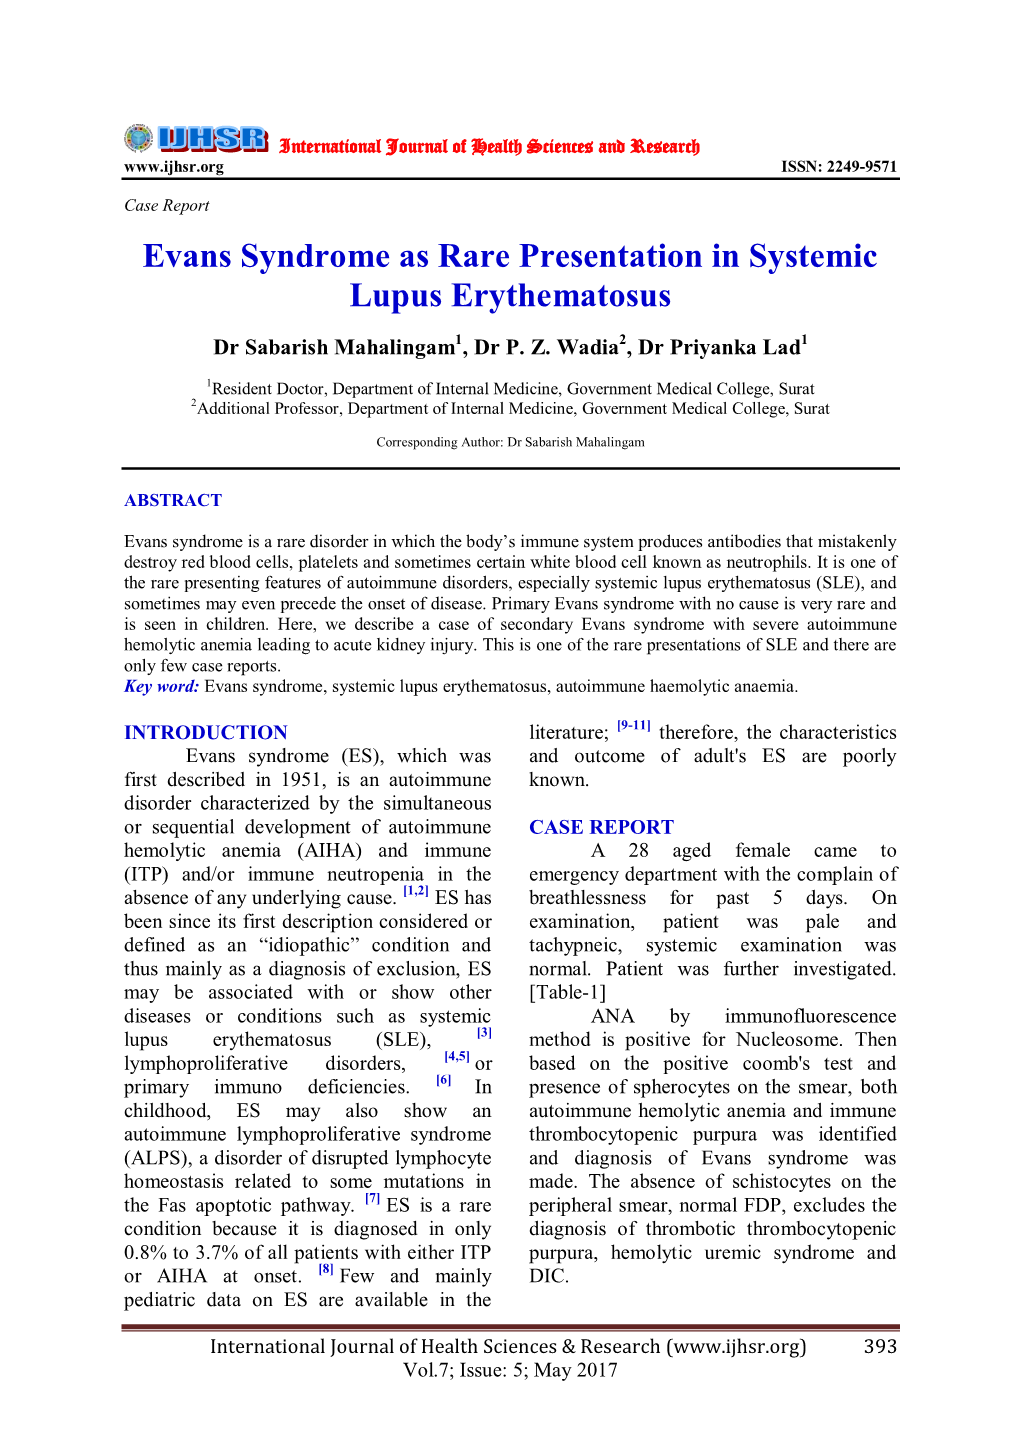 Evans Syndrome As Rare Presentation in Systemic Lupus Erythematosus